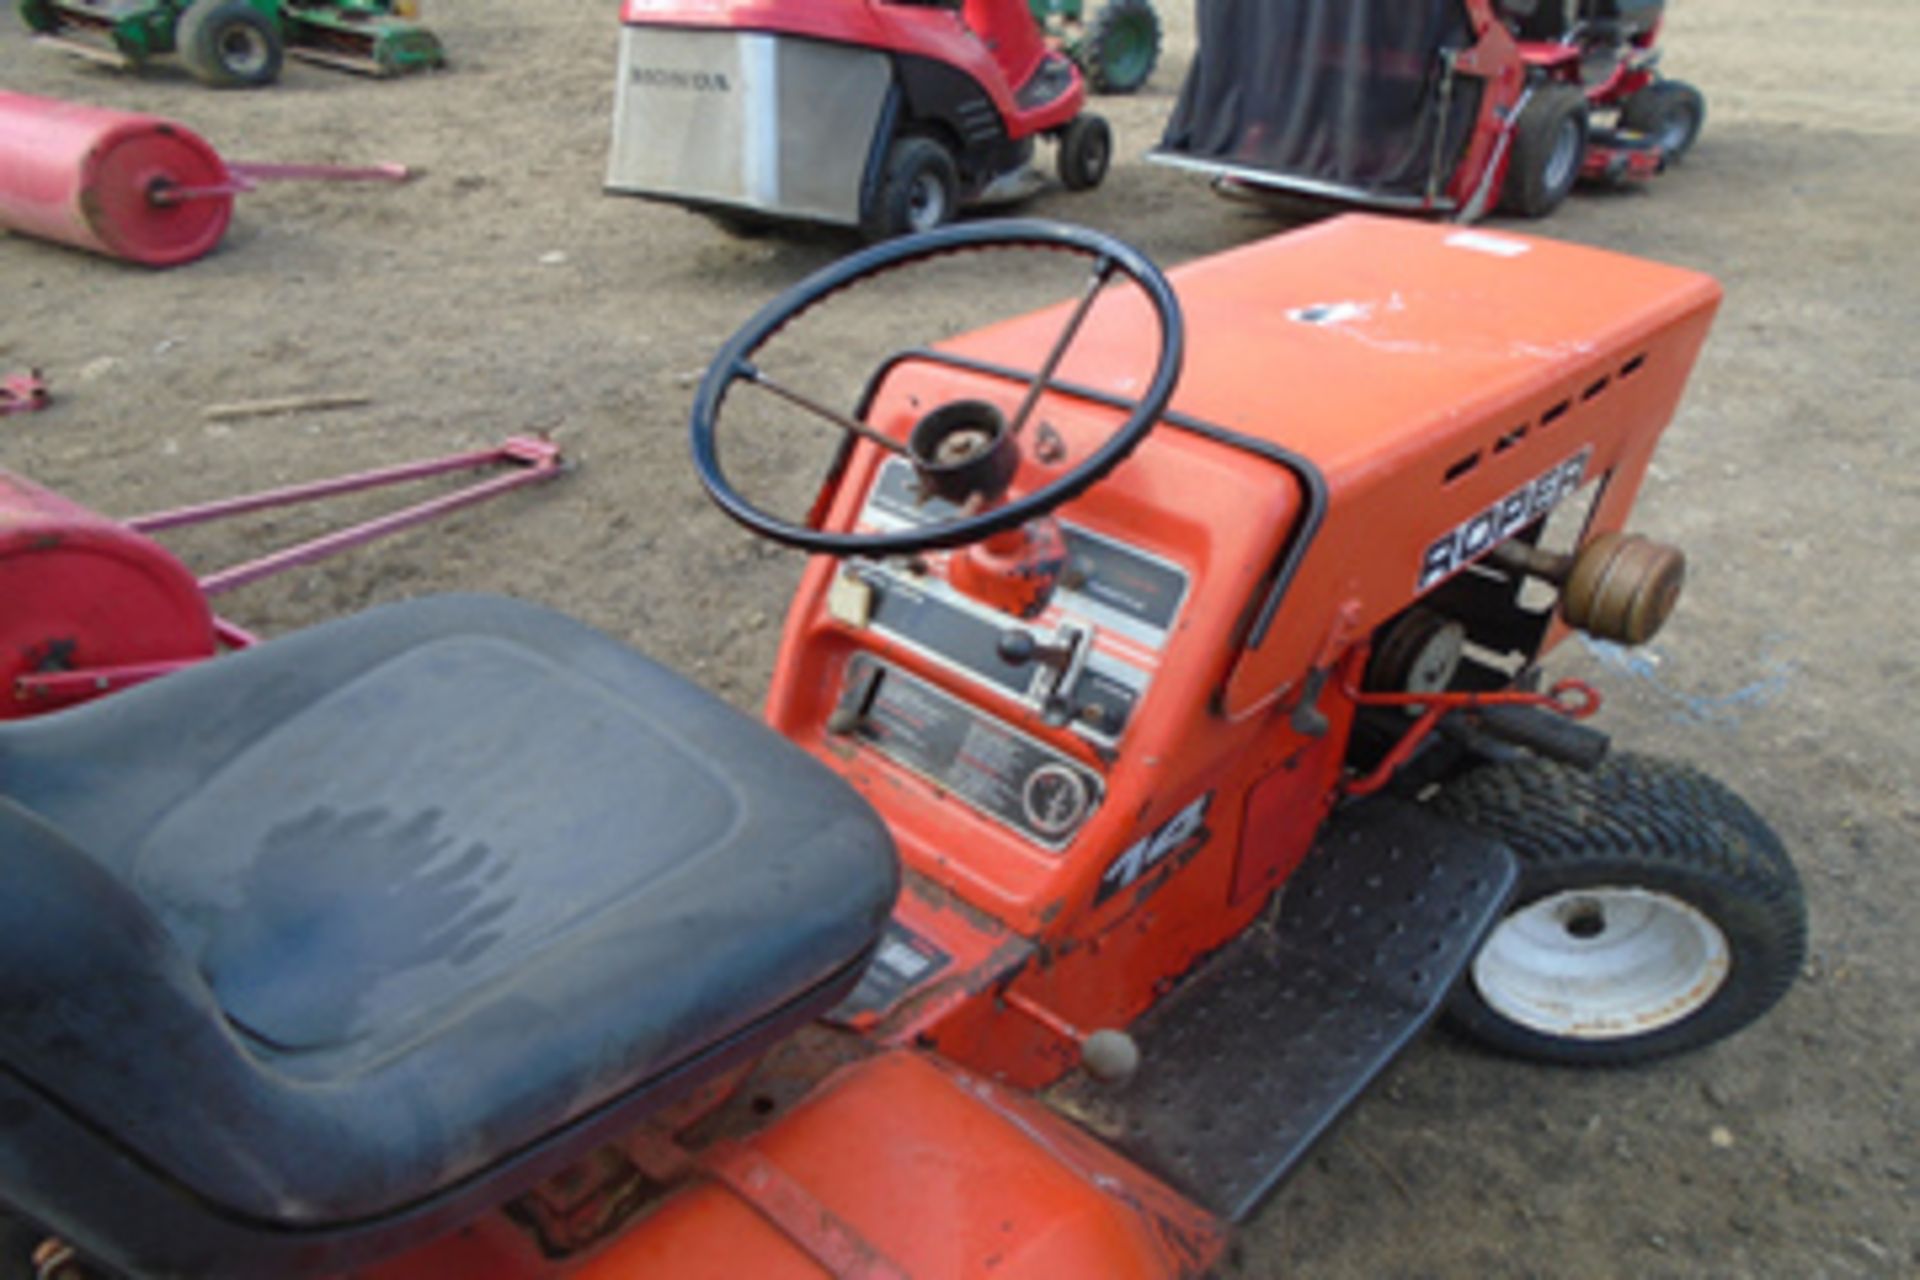 Roper 14 mini tractor with grass cutter and snow plough attachments - Image 7 of 8